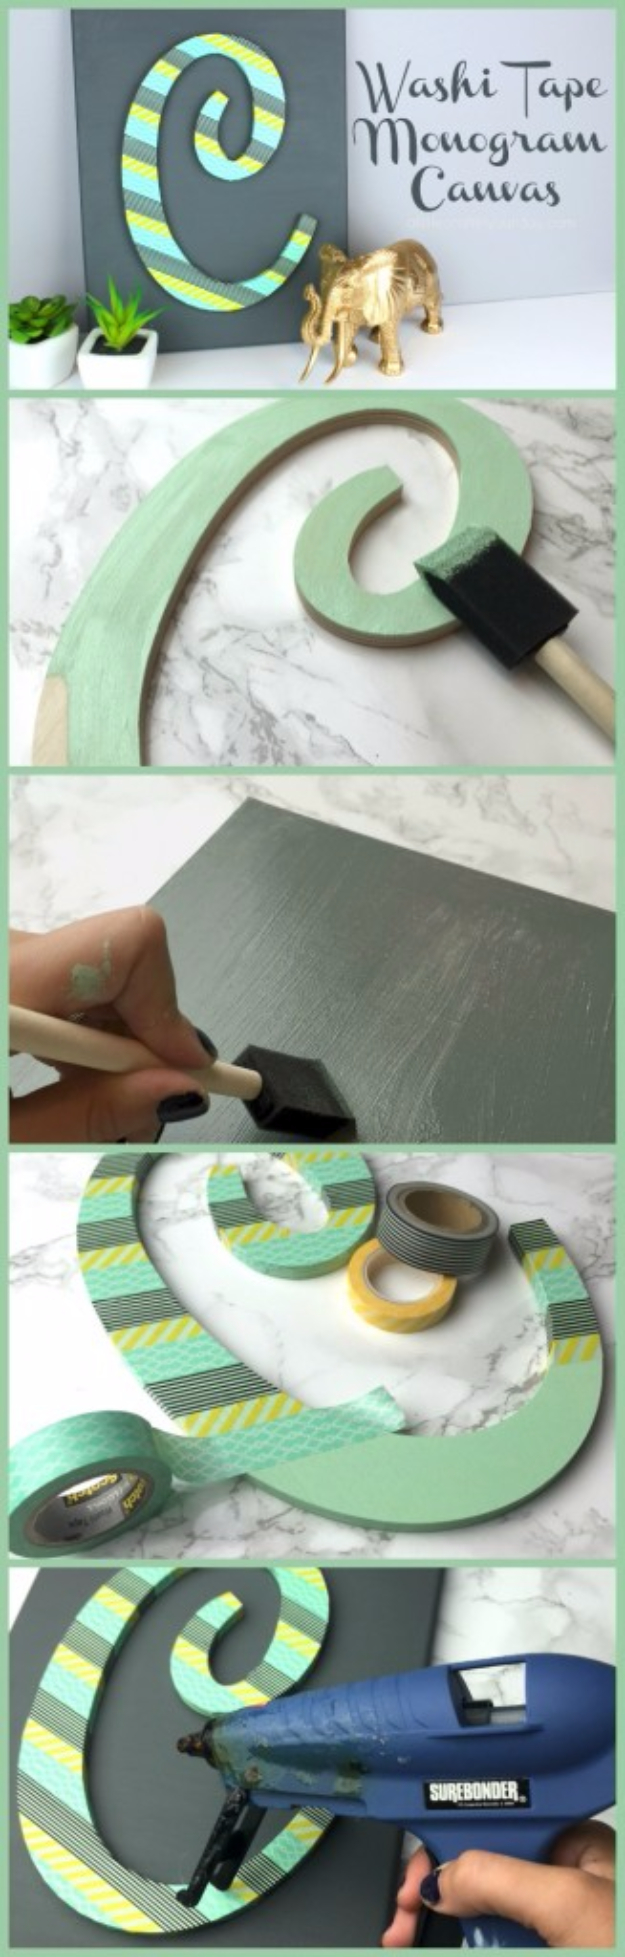 DIY Wall Letters and Initals Wall Art - Washi Tape Monogram Canvas - Cool Architectural Letter Projects for Living Room Decor, Bedroom Ideas. Girl or Boy Nursery. Paint, Glitter, String Art, Easy Cardboard and Rustic Wooden Ideas 